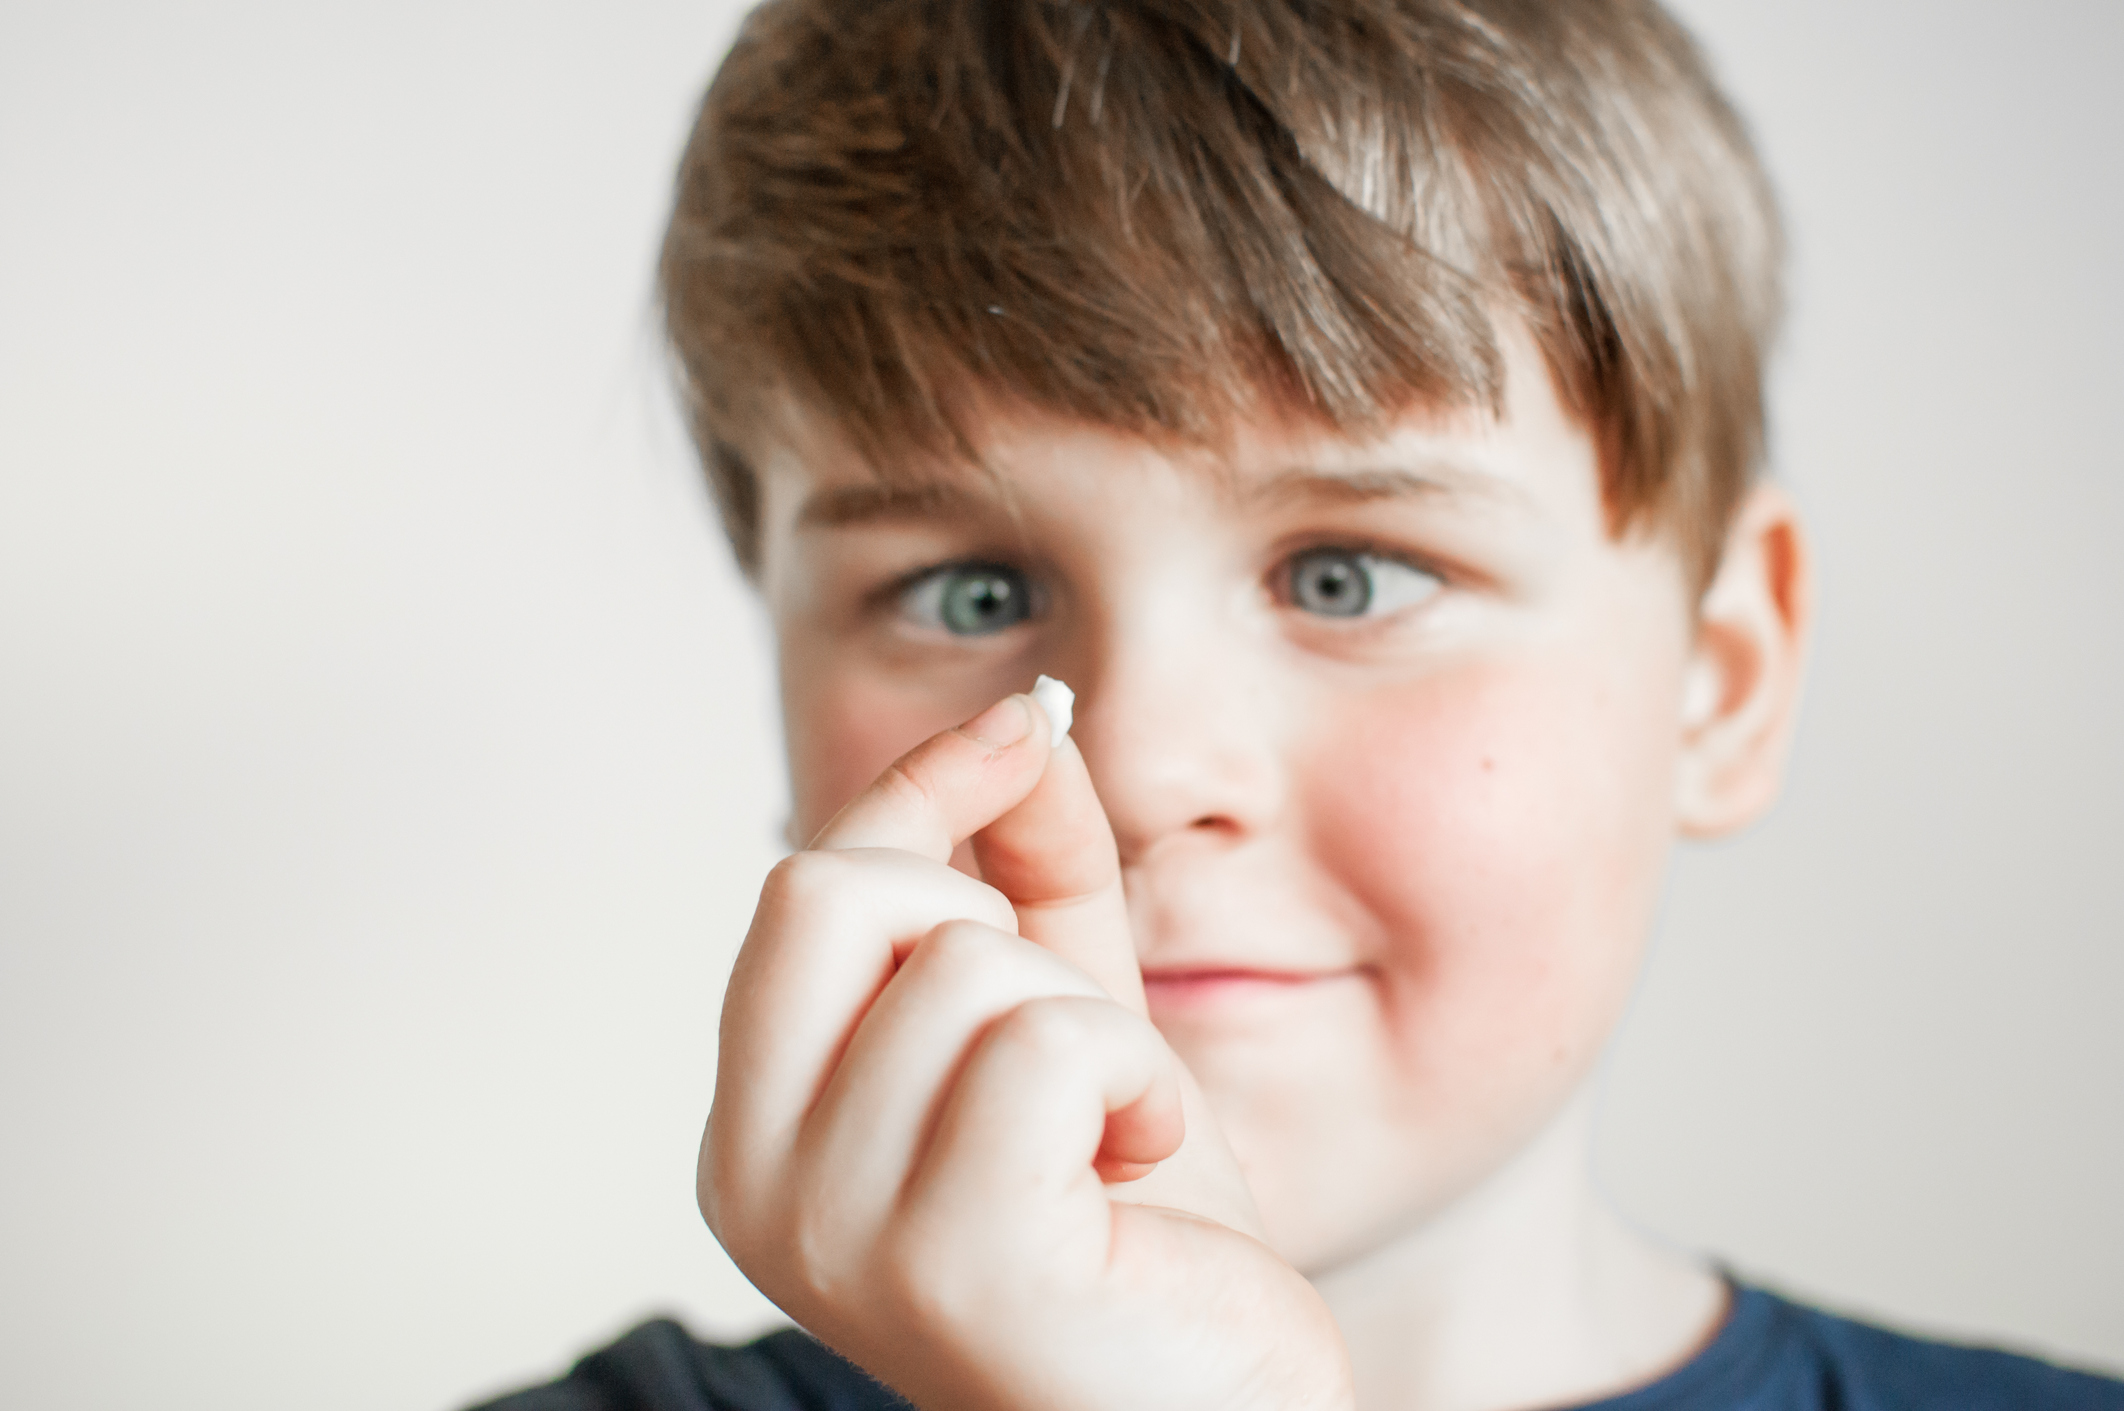 Should My Child’s Permanent Teeth Be Coming in Yet? | Pediatric Dentist Providence